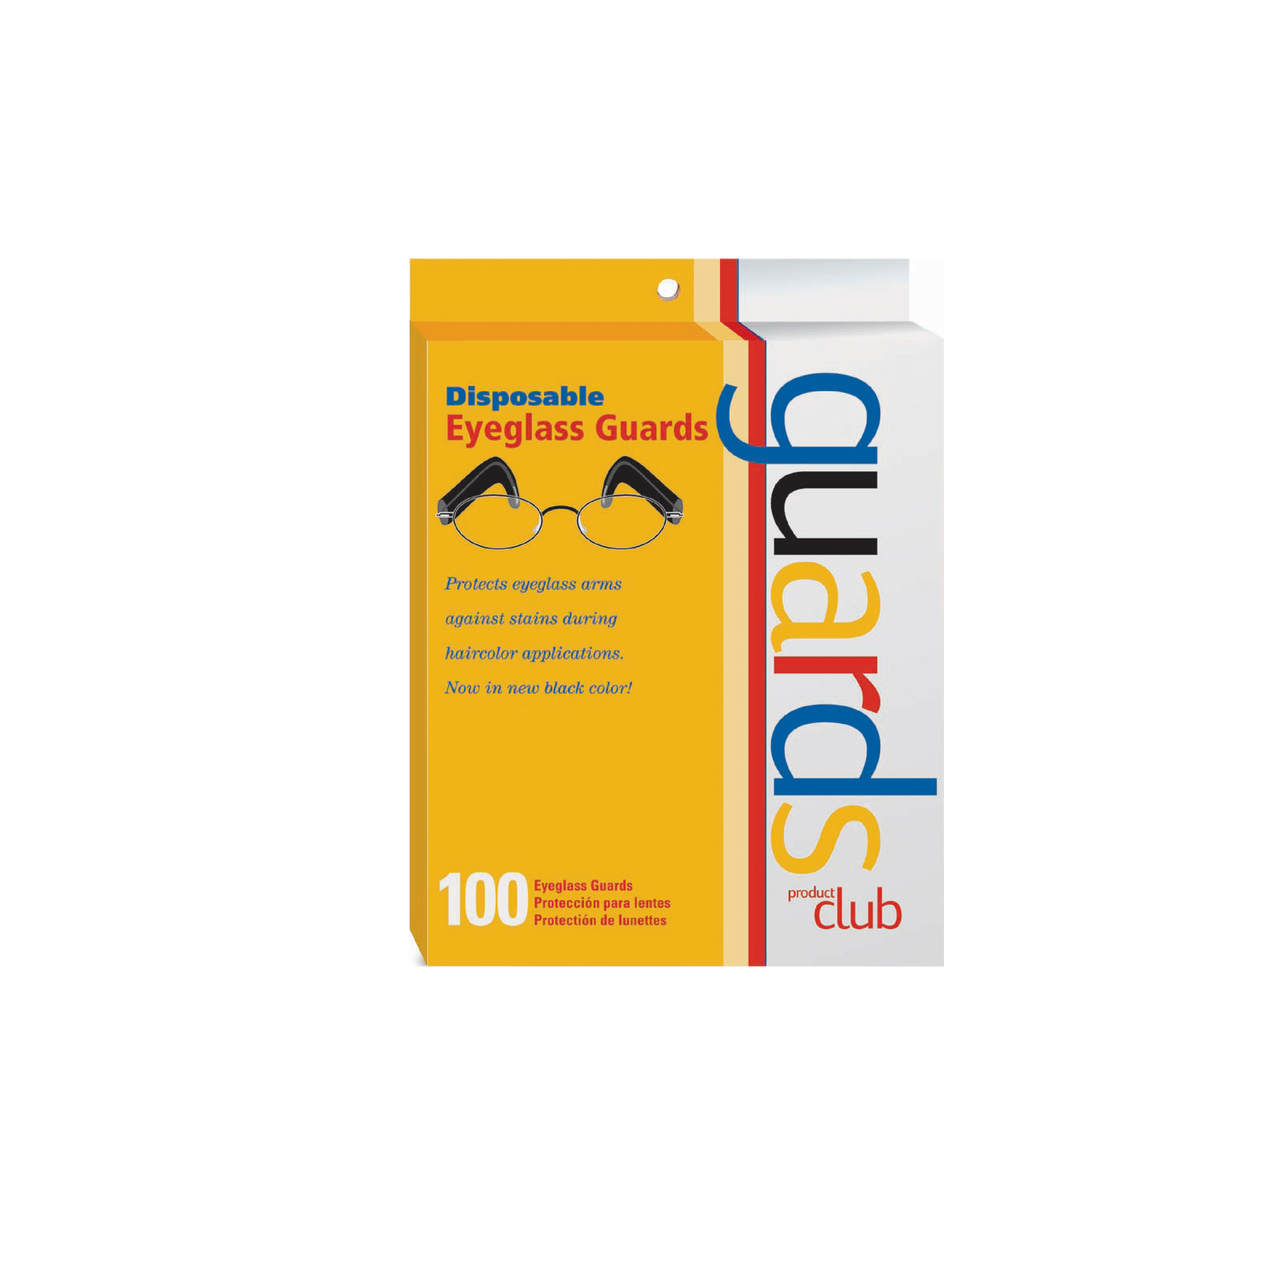 Product Club Eyeglass Guard 100 Count